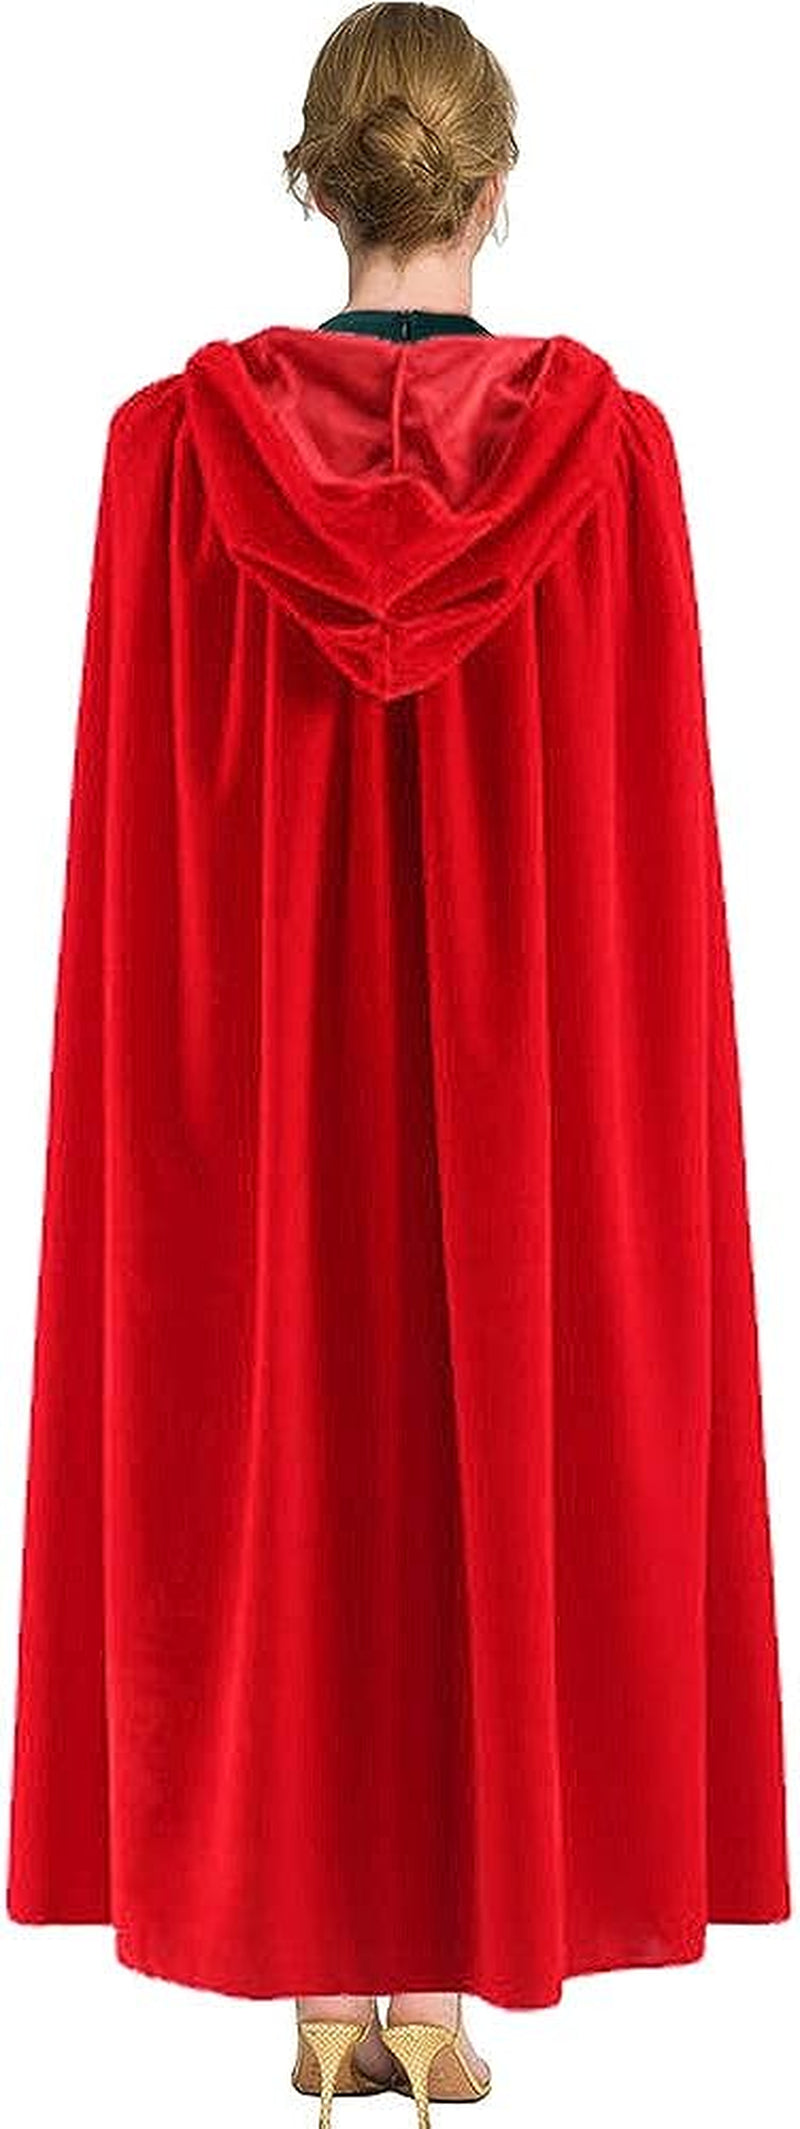 Halloween Hooded Cloak Full Length Velvet Cape with Hood for Halloween Cosplay Costume,59 Inch  iShyan Red  